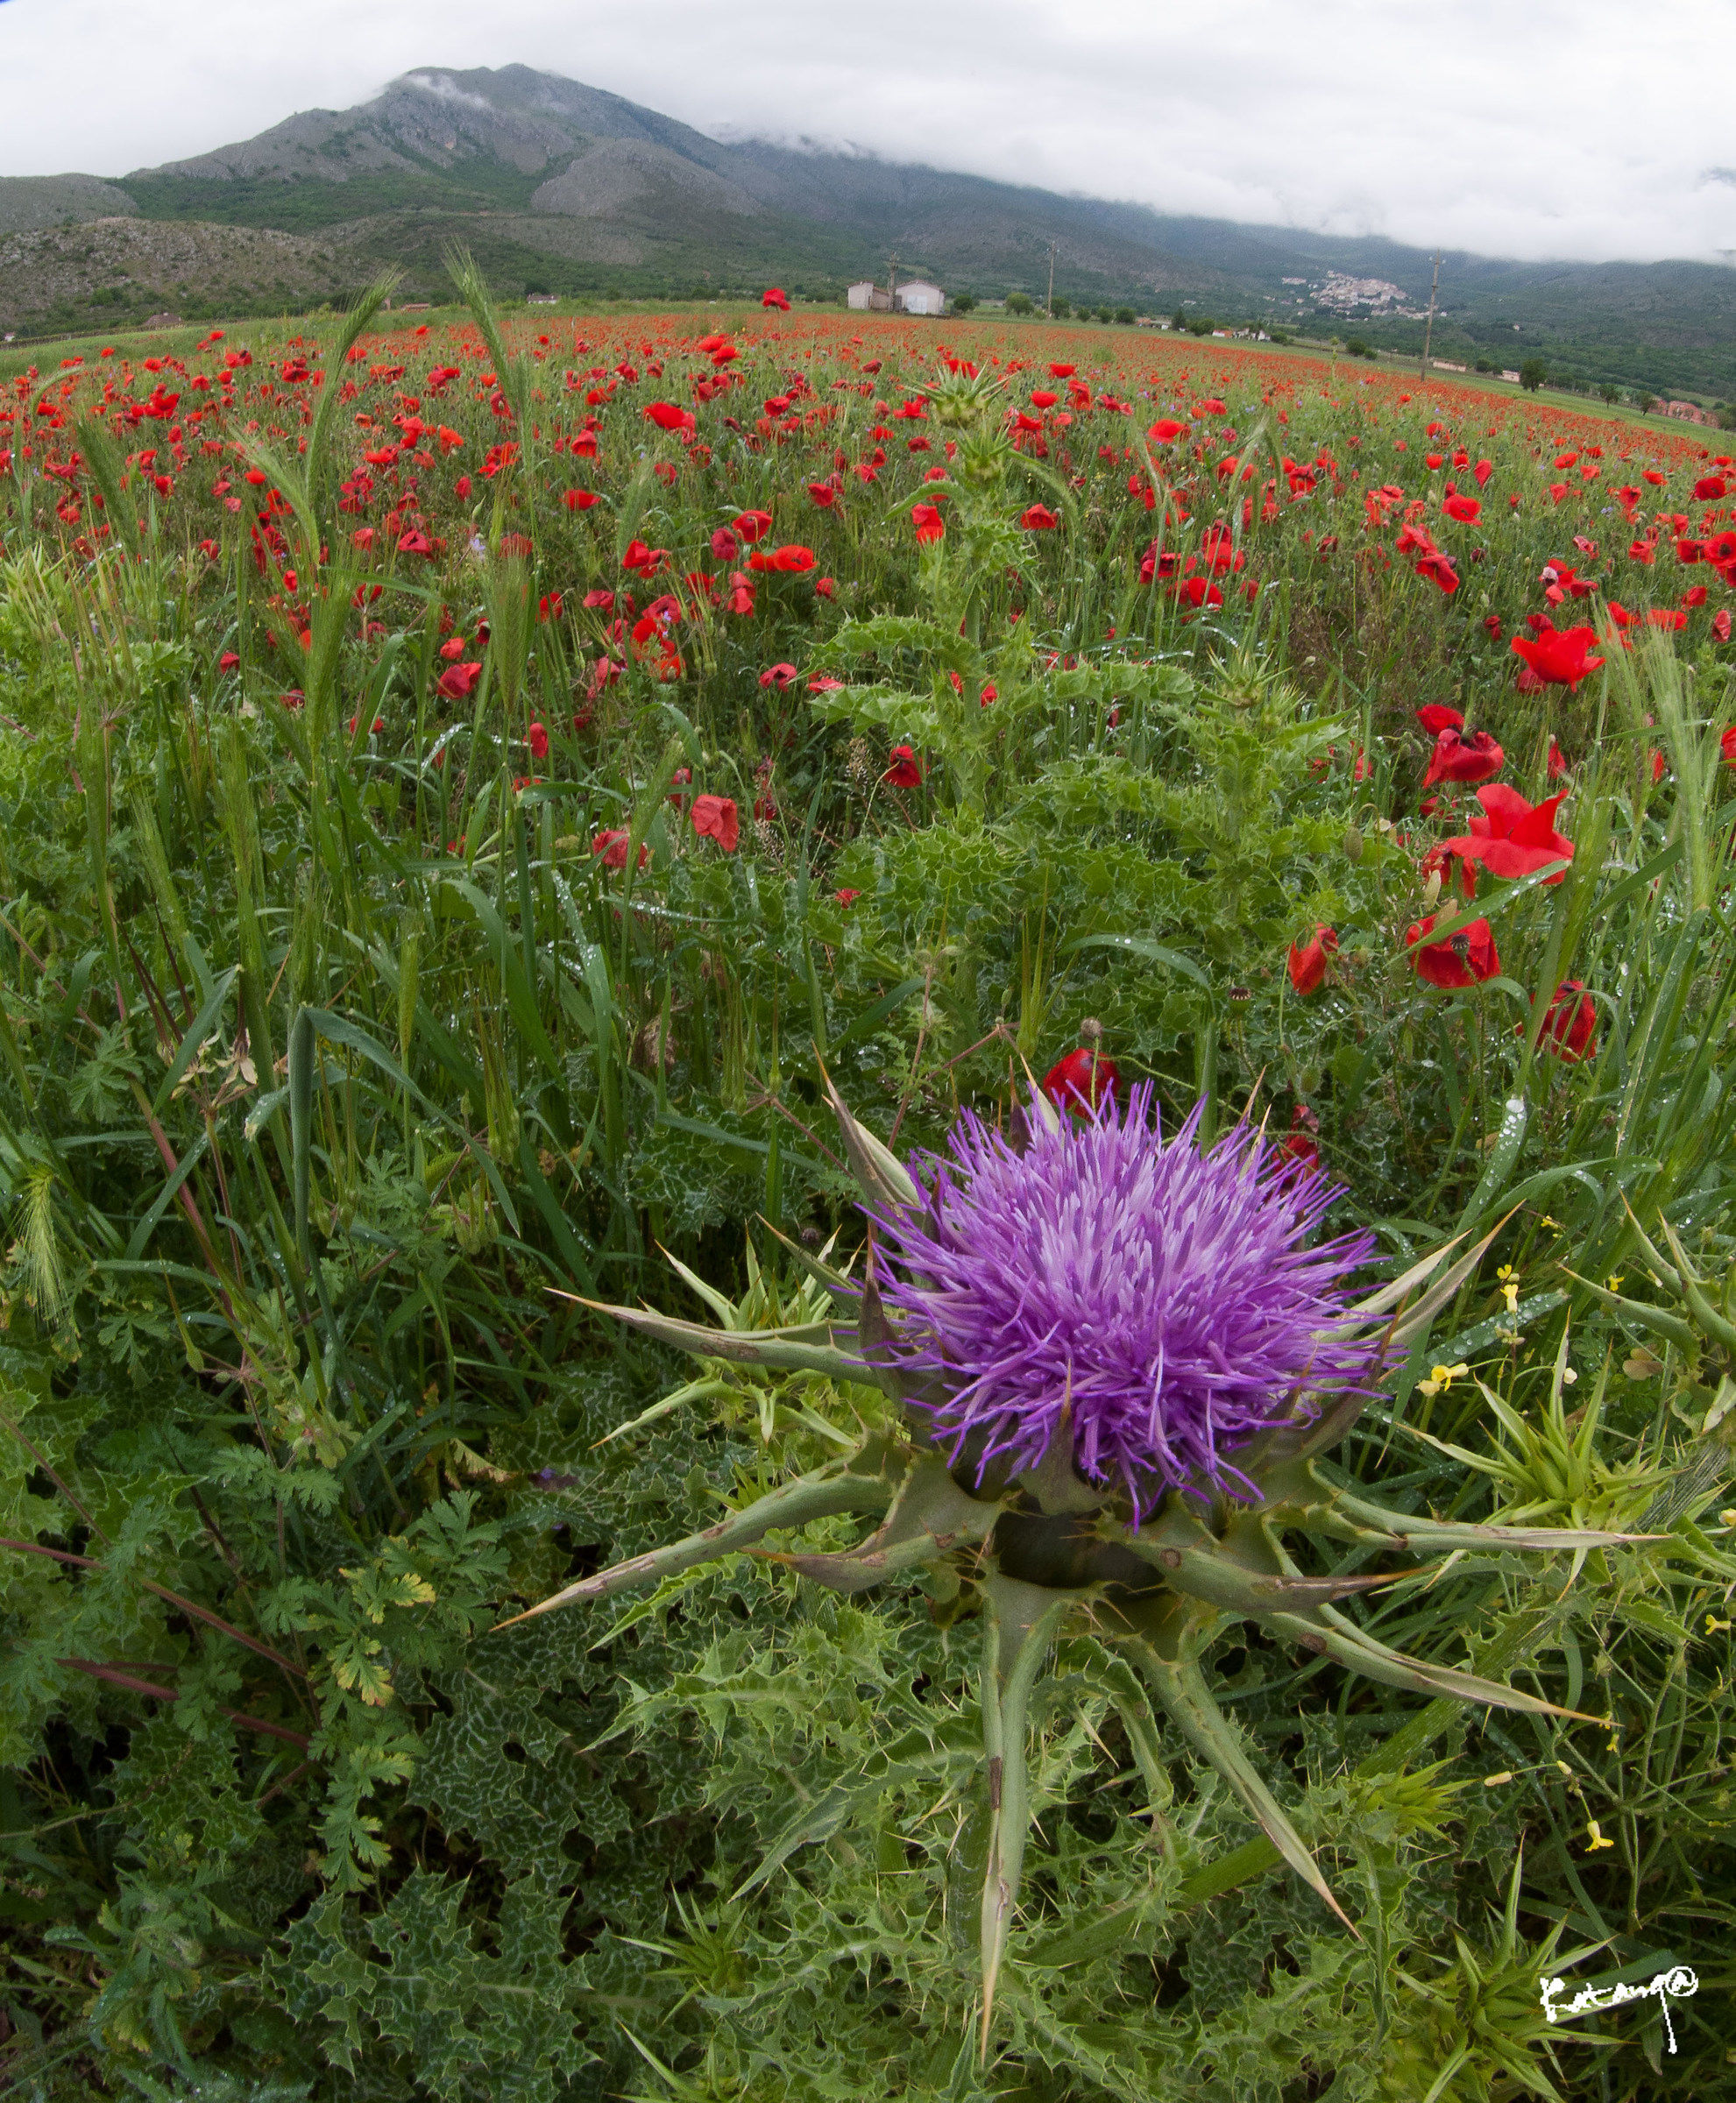 The Thistle and the poppies...